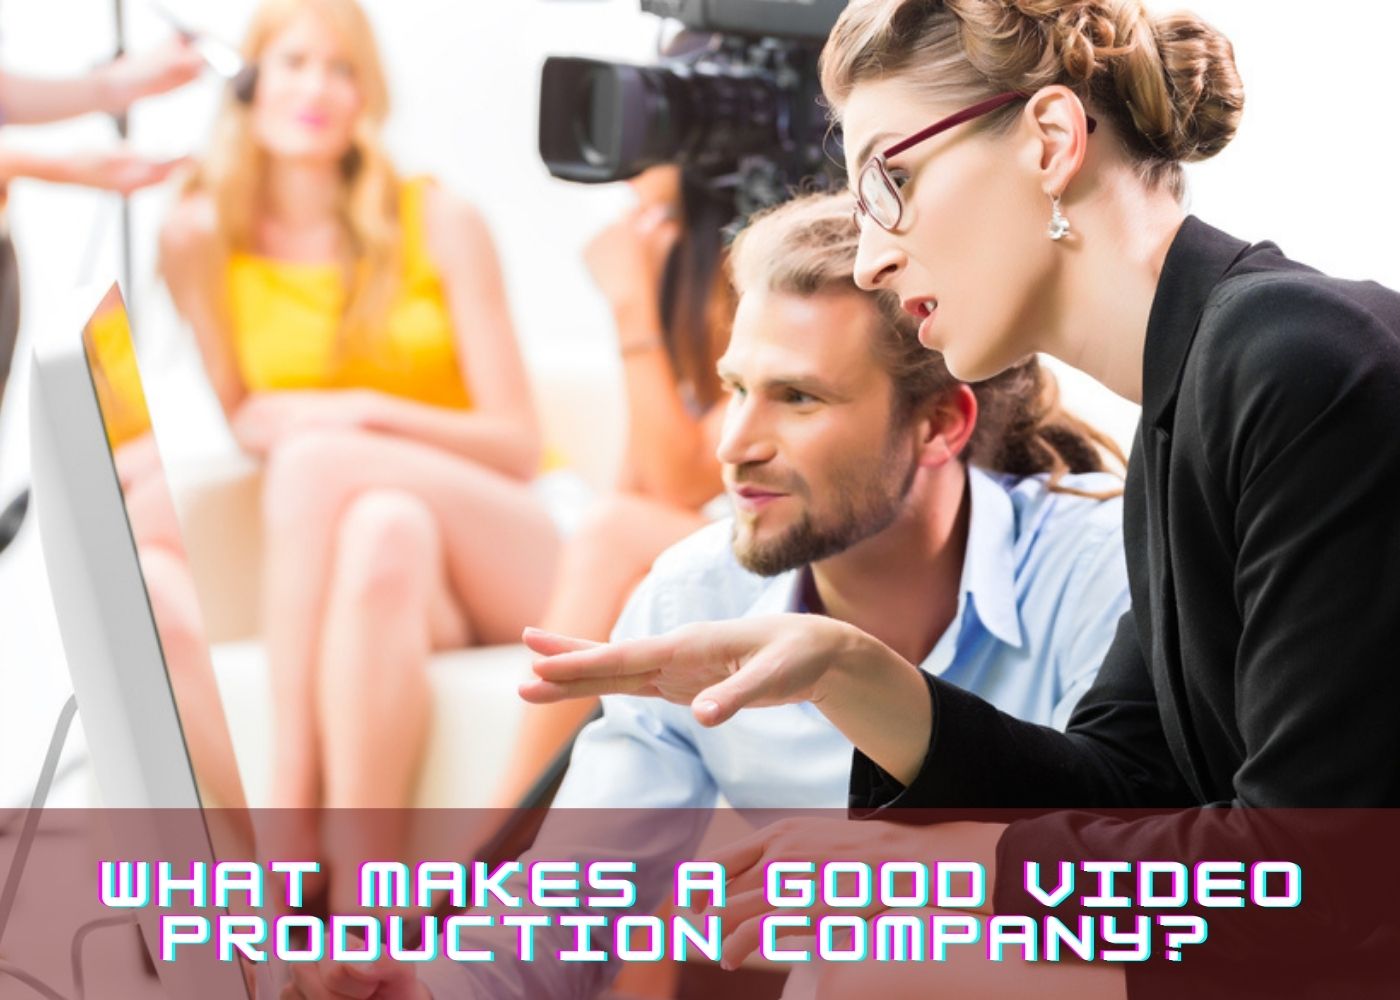 What Makes a Good Video Production Company? 